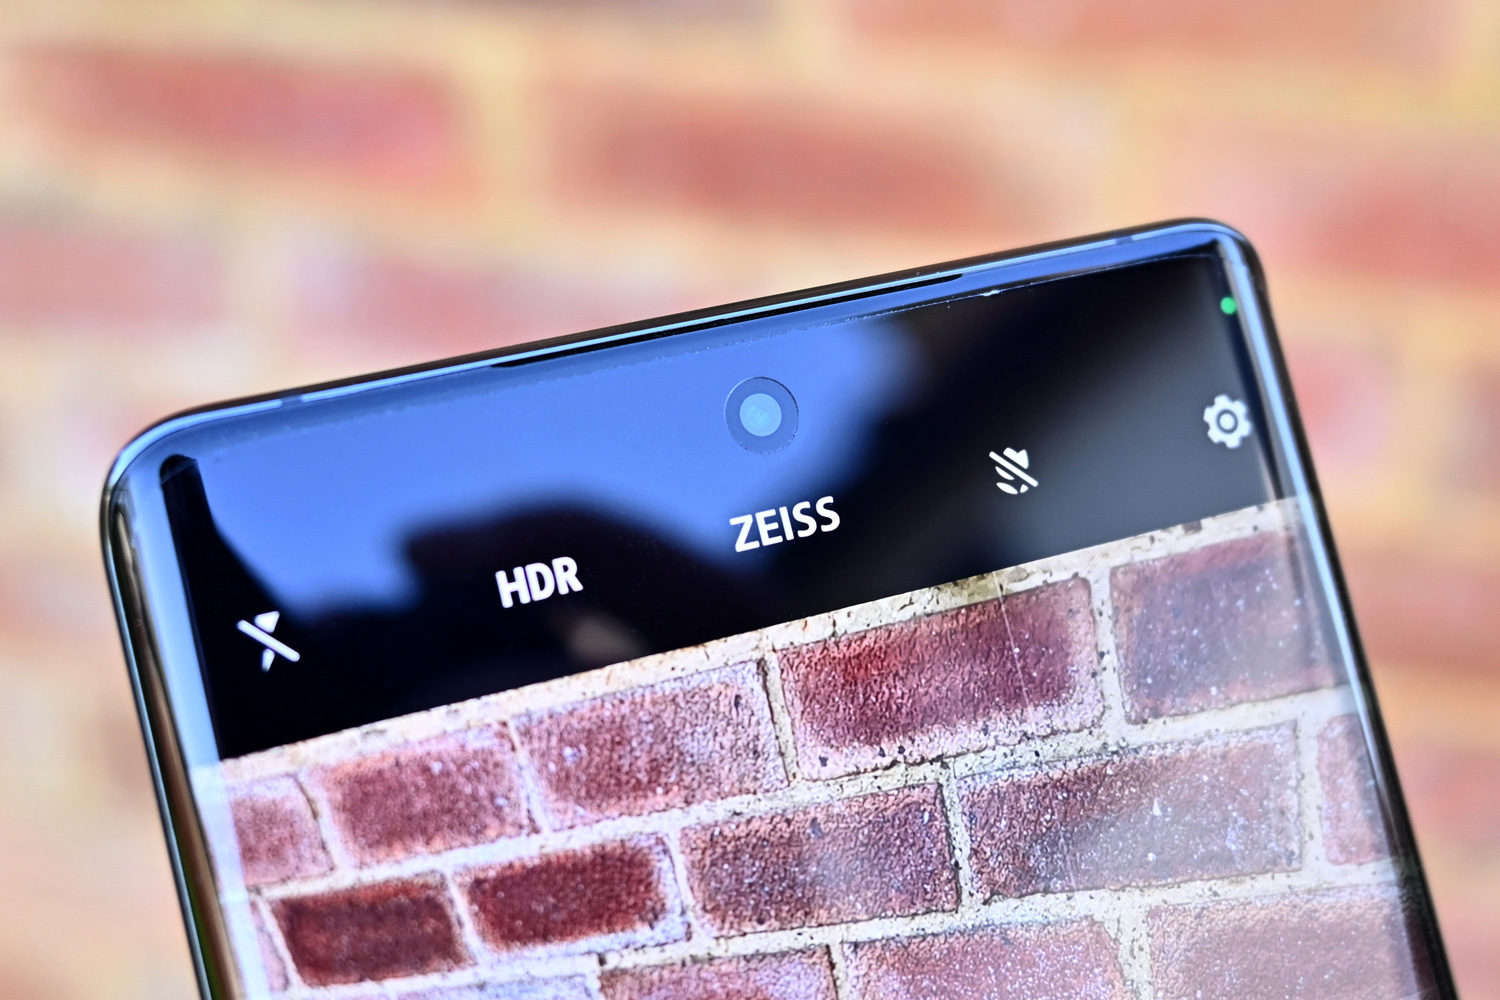 Vivo X90 Pro review: A camera-focused phone backed by top-notch performance